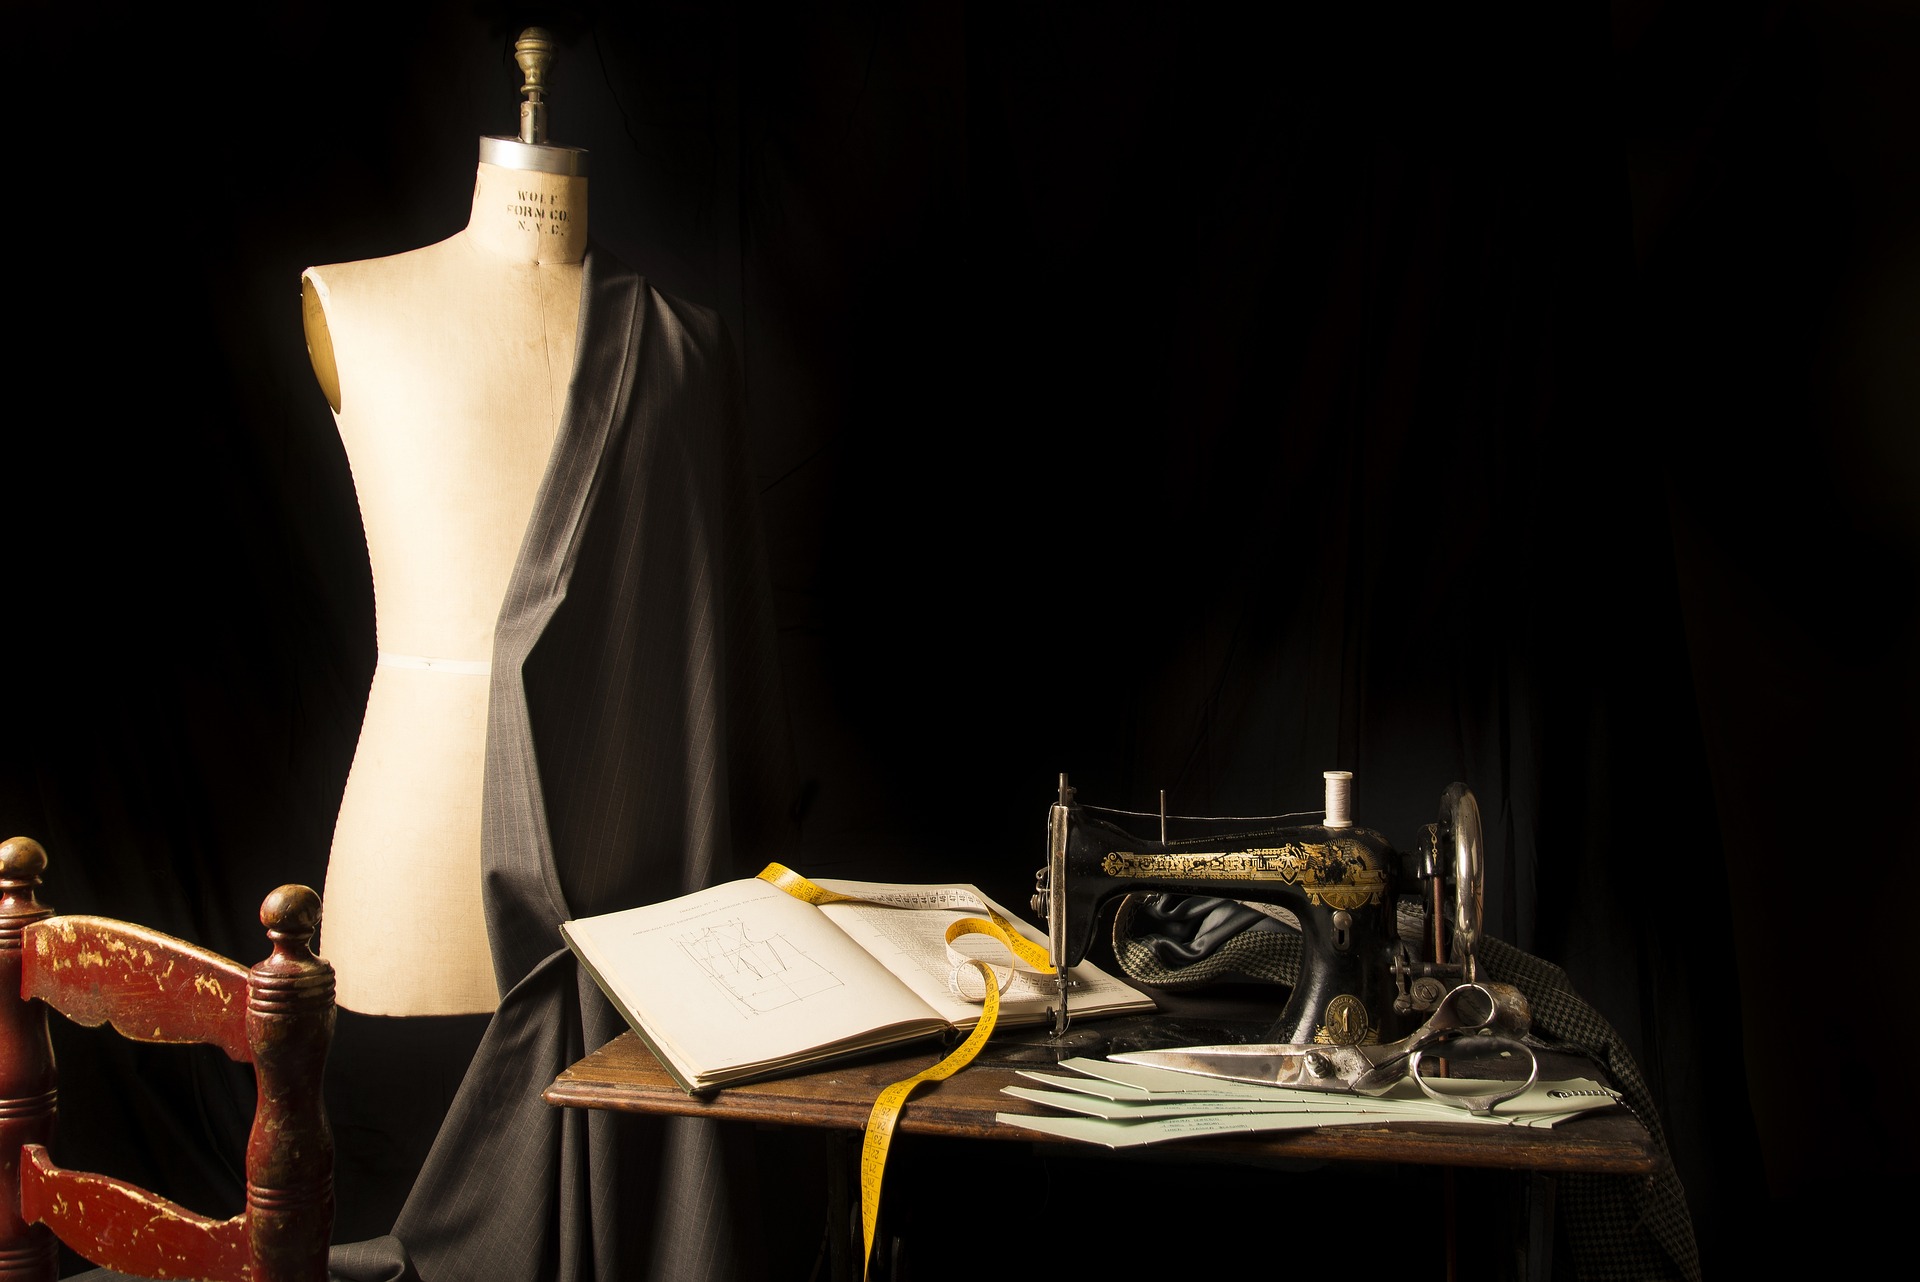 Vintage sewing machine and an open book on a table in front of a dress form and black background